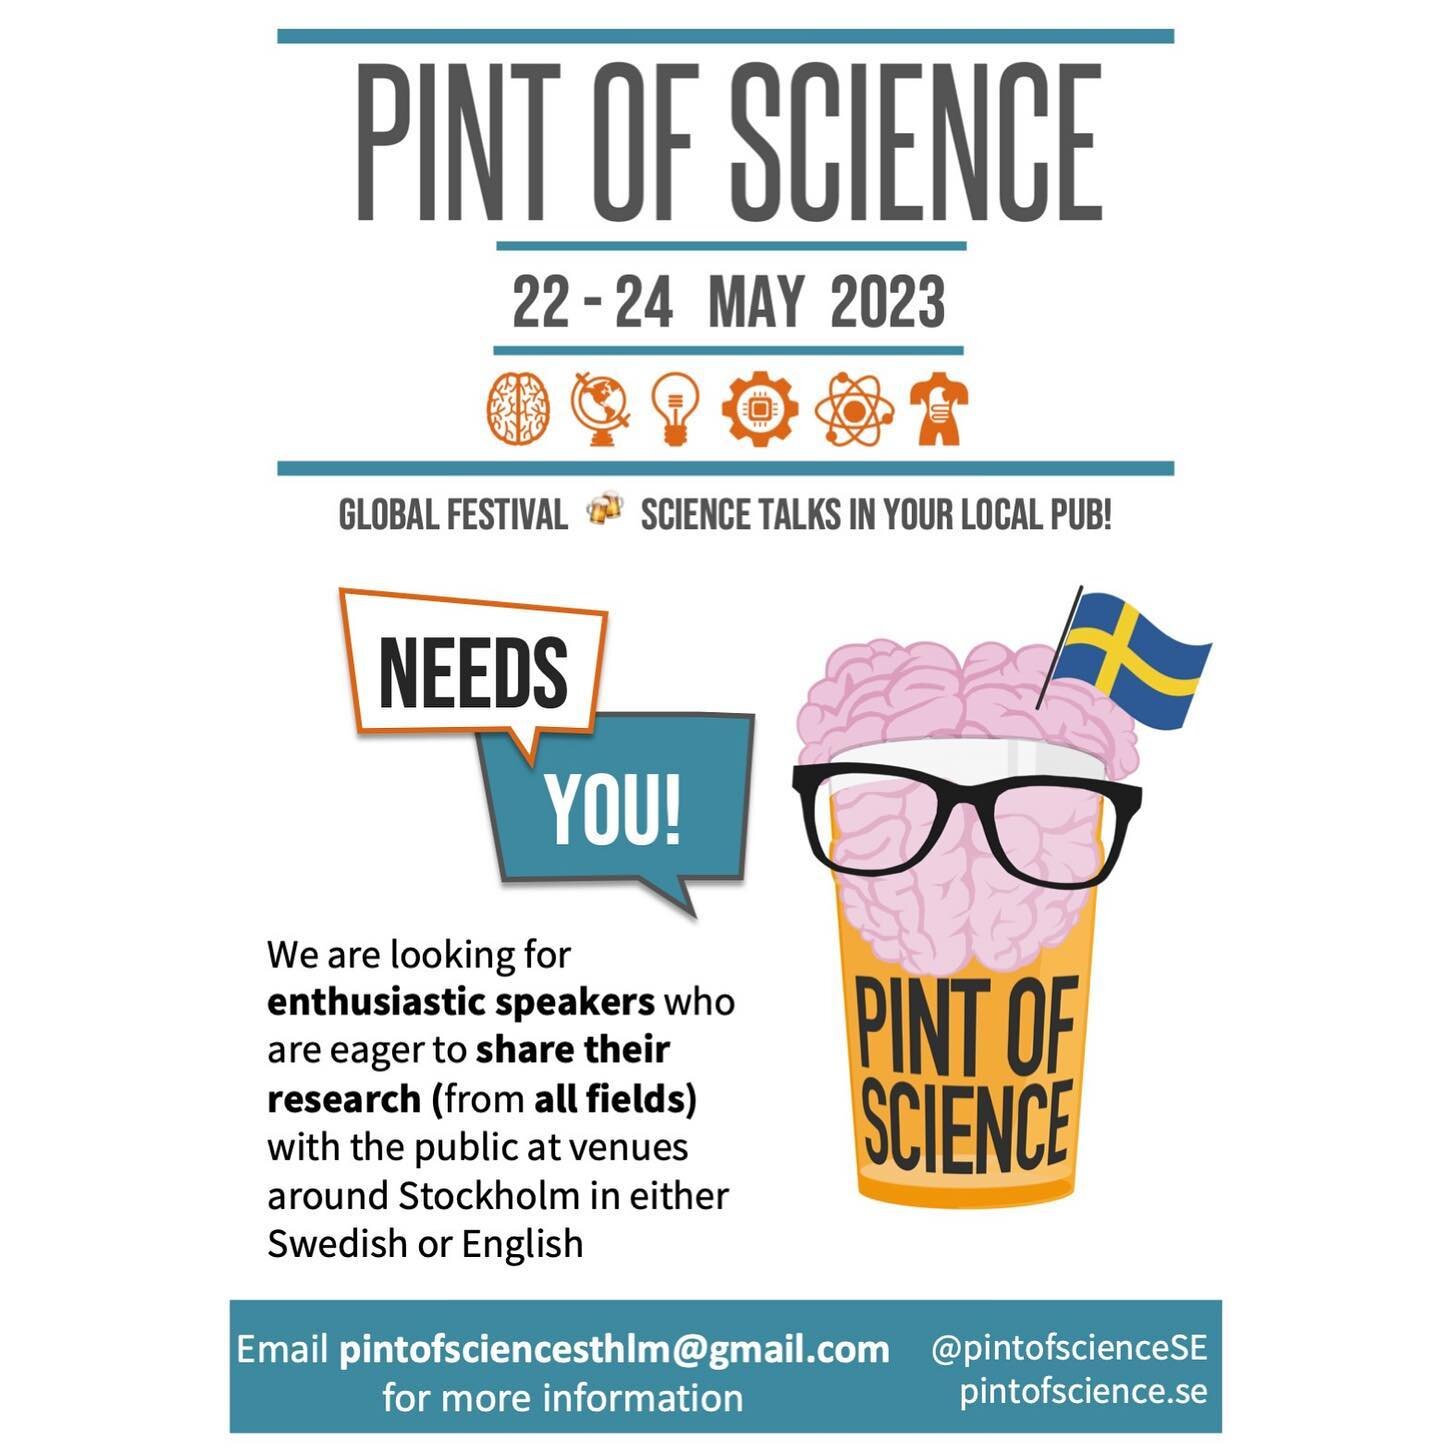 Pint of Science are looking for enthusiastic speakers who want to share their research with the public! Researchers from all areas welcome and speakers can present in English or Swedish. Email pintofsciencesthlm@gmail.com